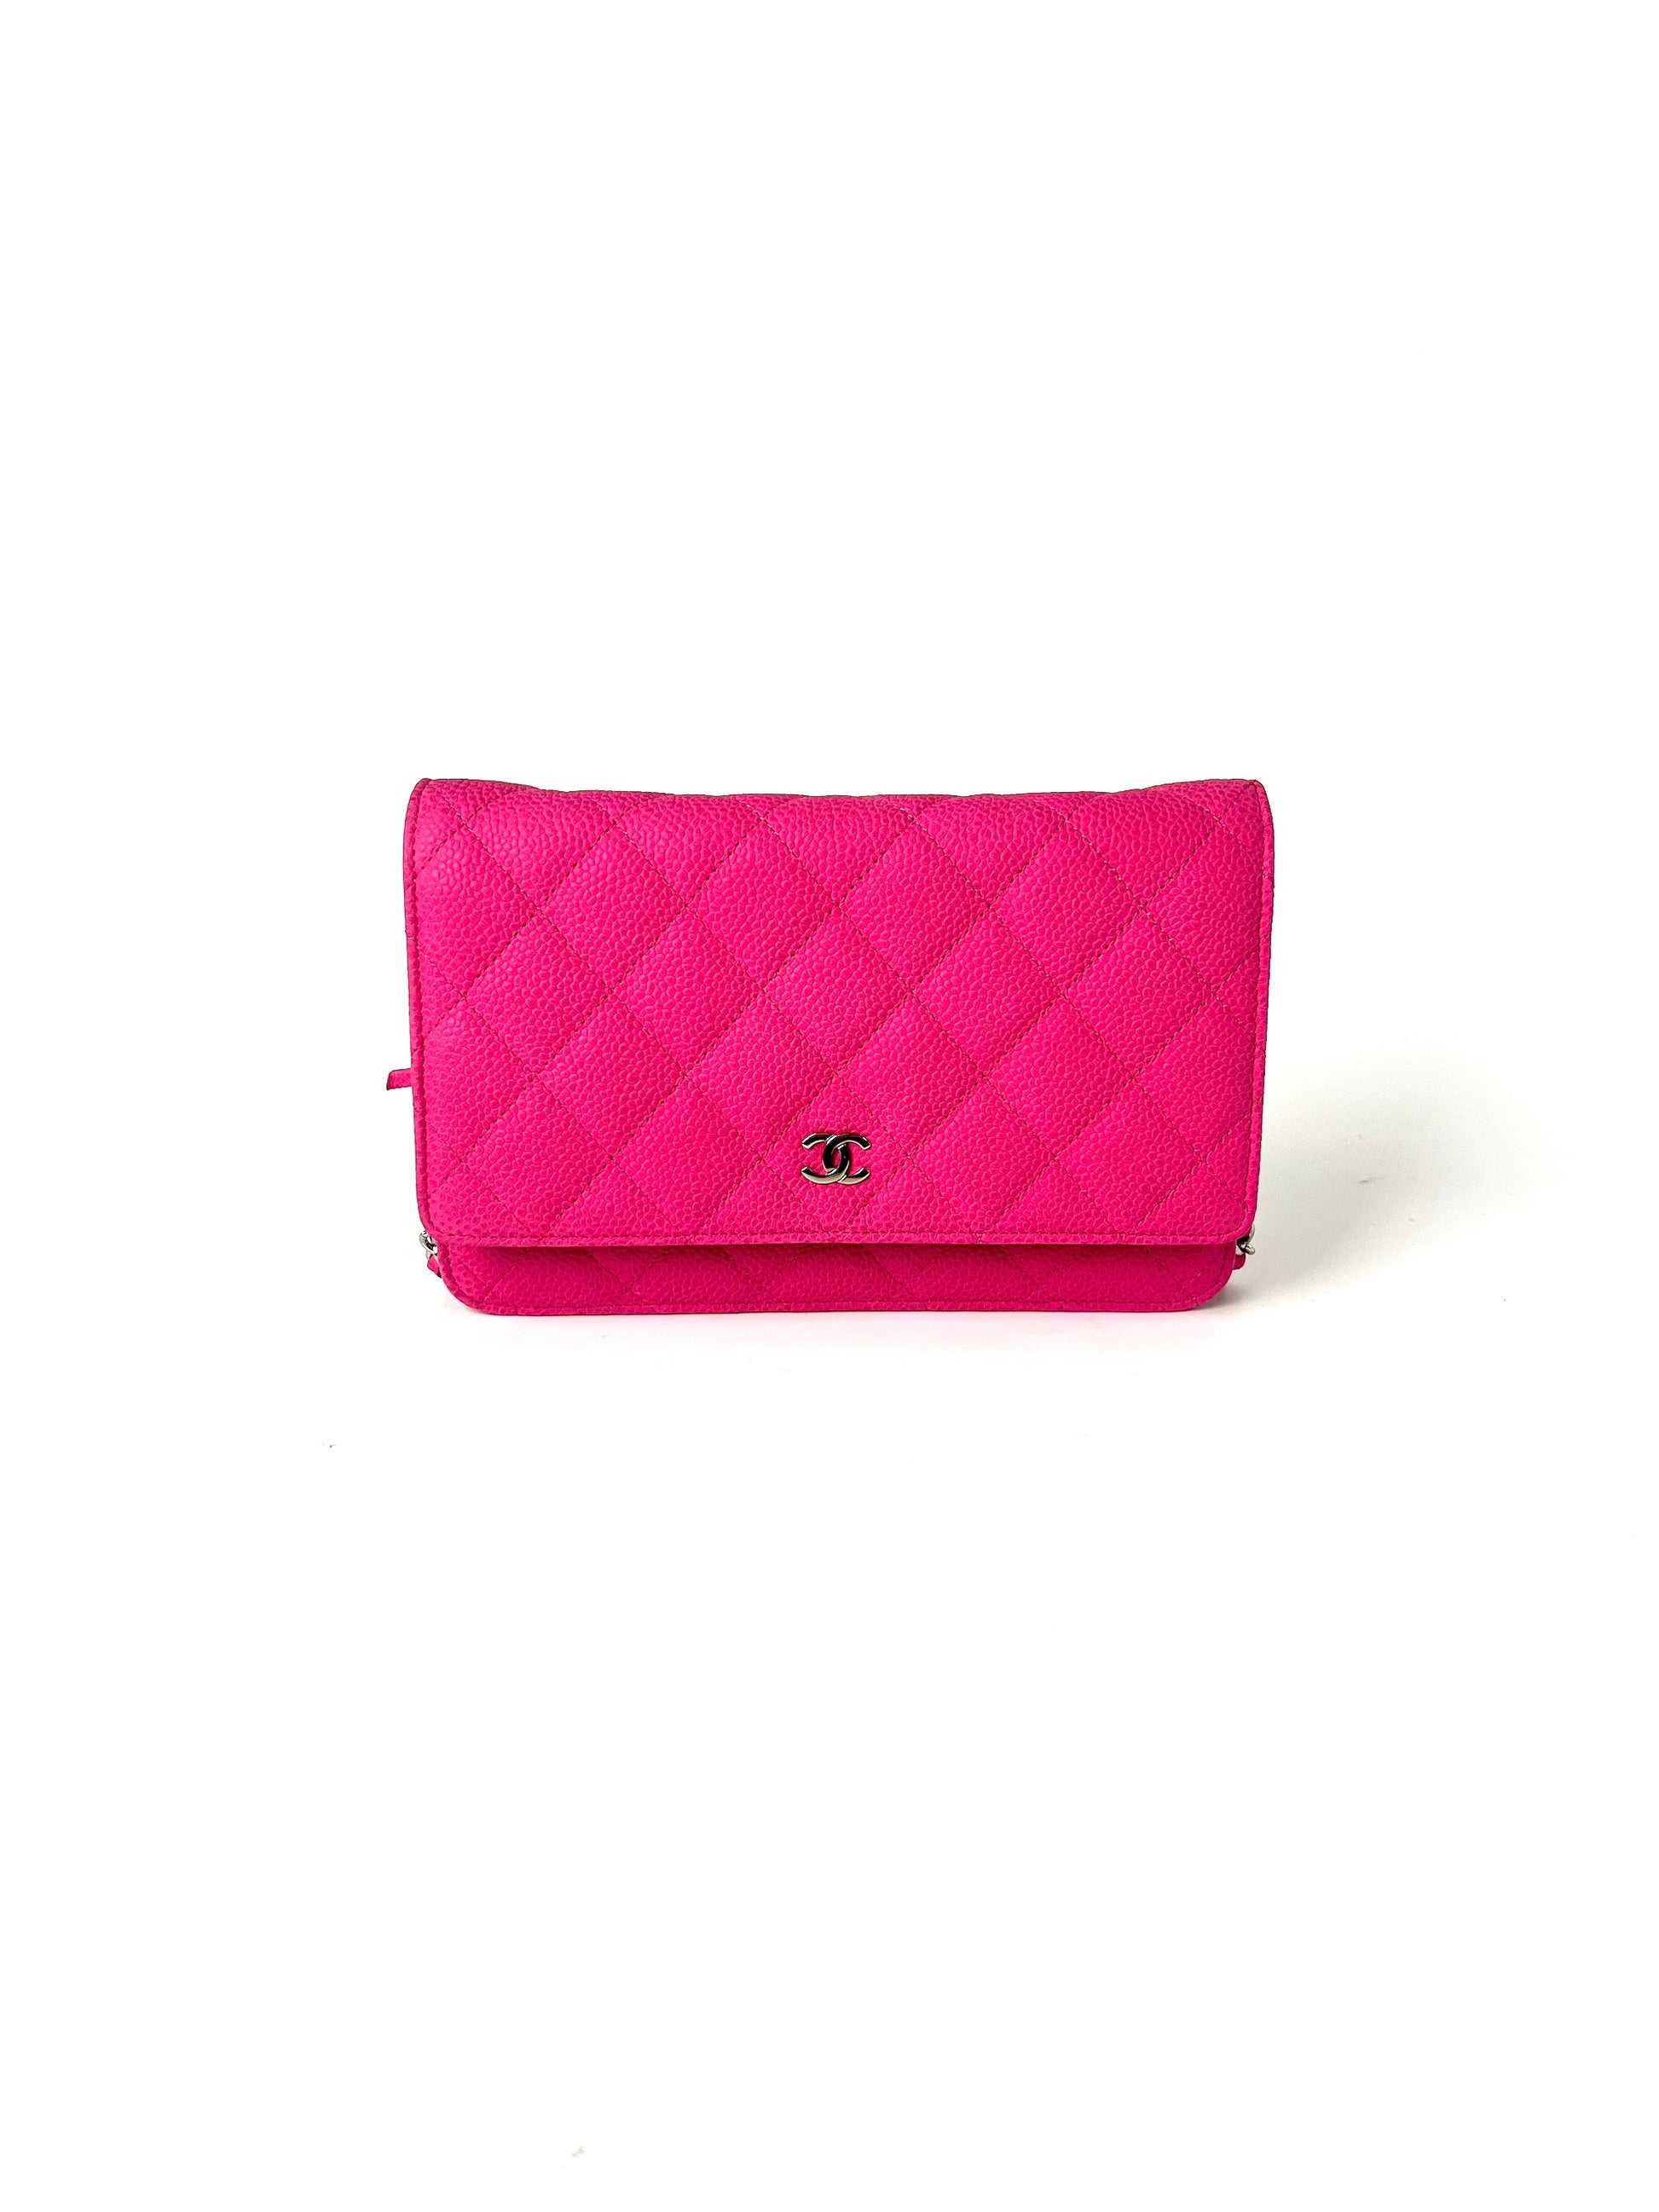 CHANEL 13S WOC Wallet on Chain Hot Pink Quilted Leather Crossbody Bag Pop of color Pink crossbody bag pink acccessory